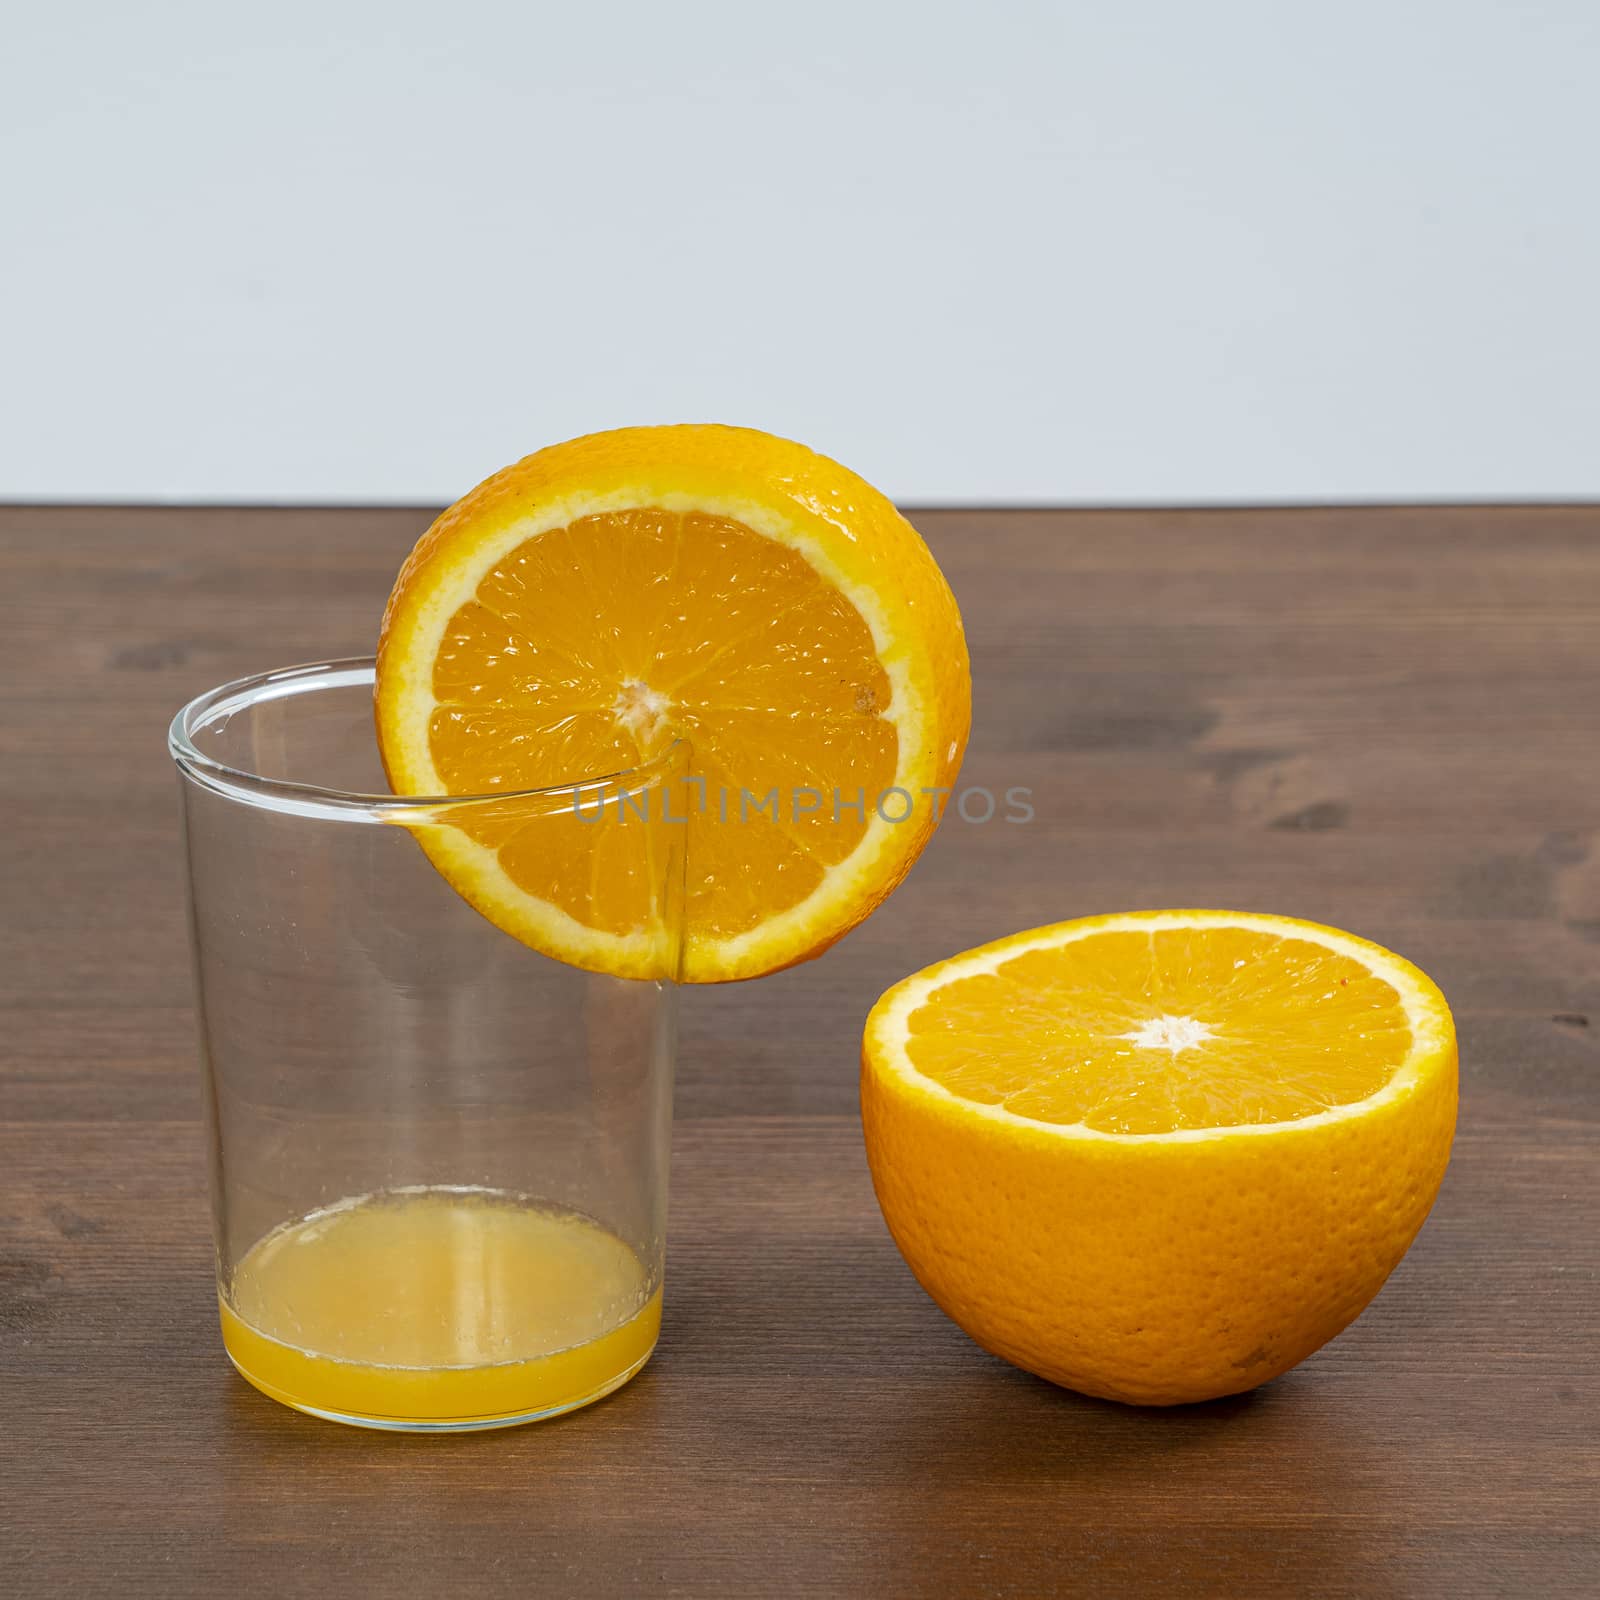 An orange fruit sliced and a glass on a wooden surface